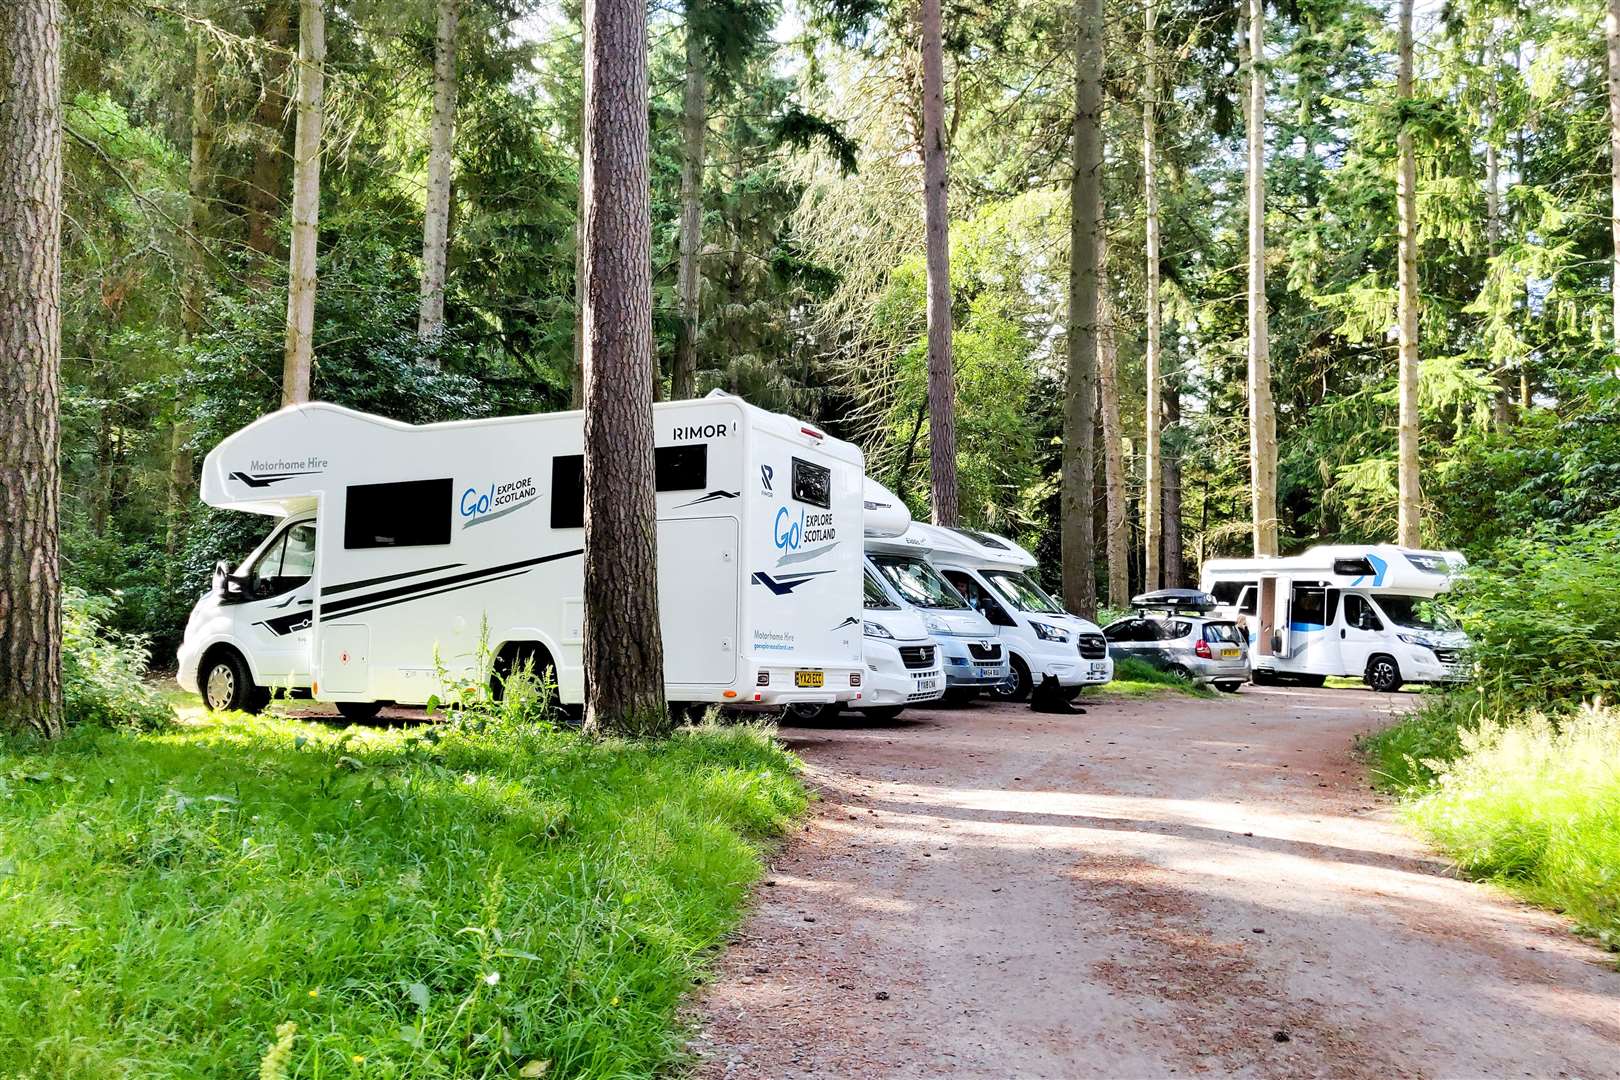 Camper vans parked in Culloden Woods carpark on the 20th July 2021. Picture: Staff photographer..